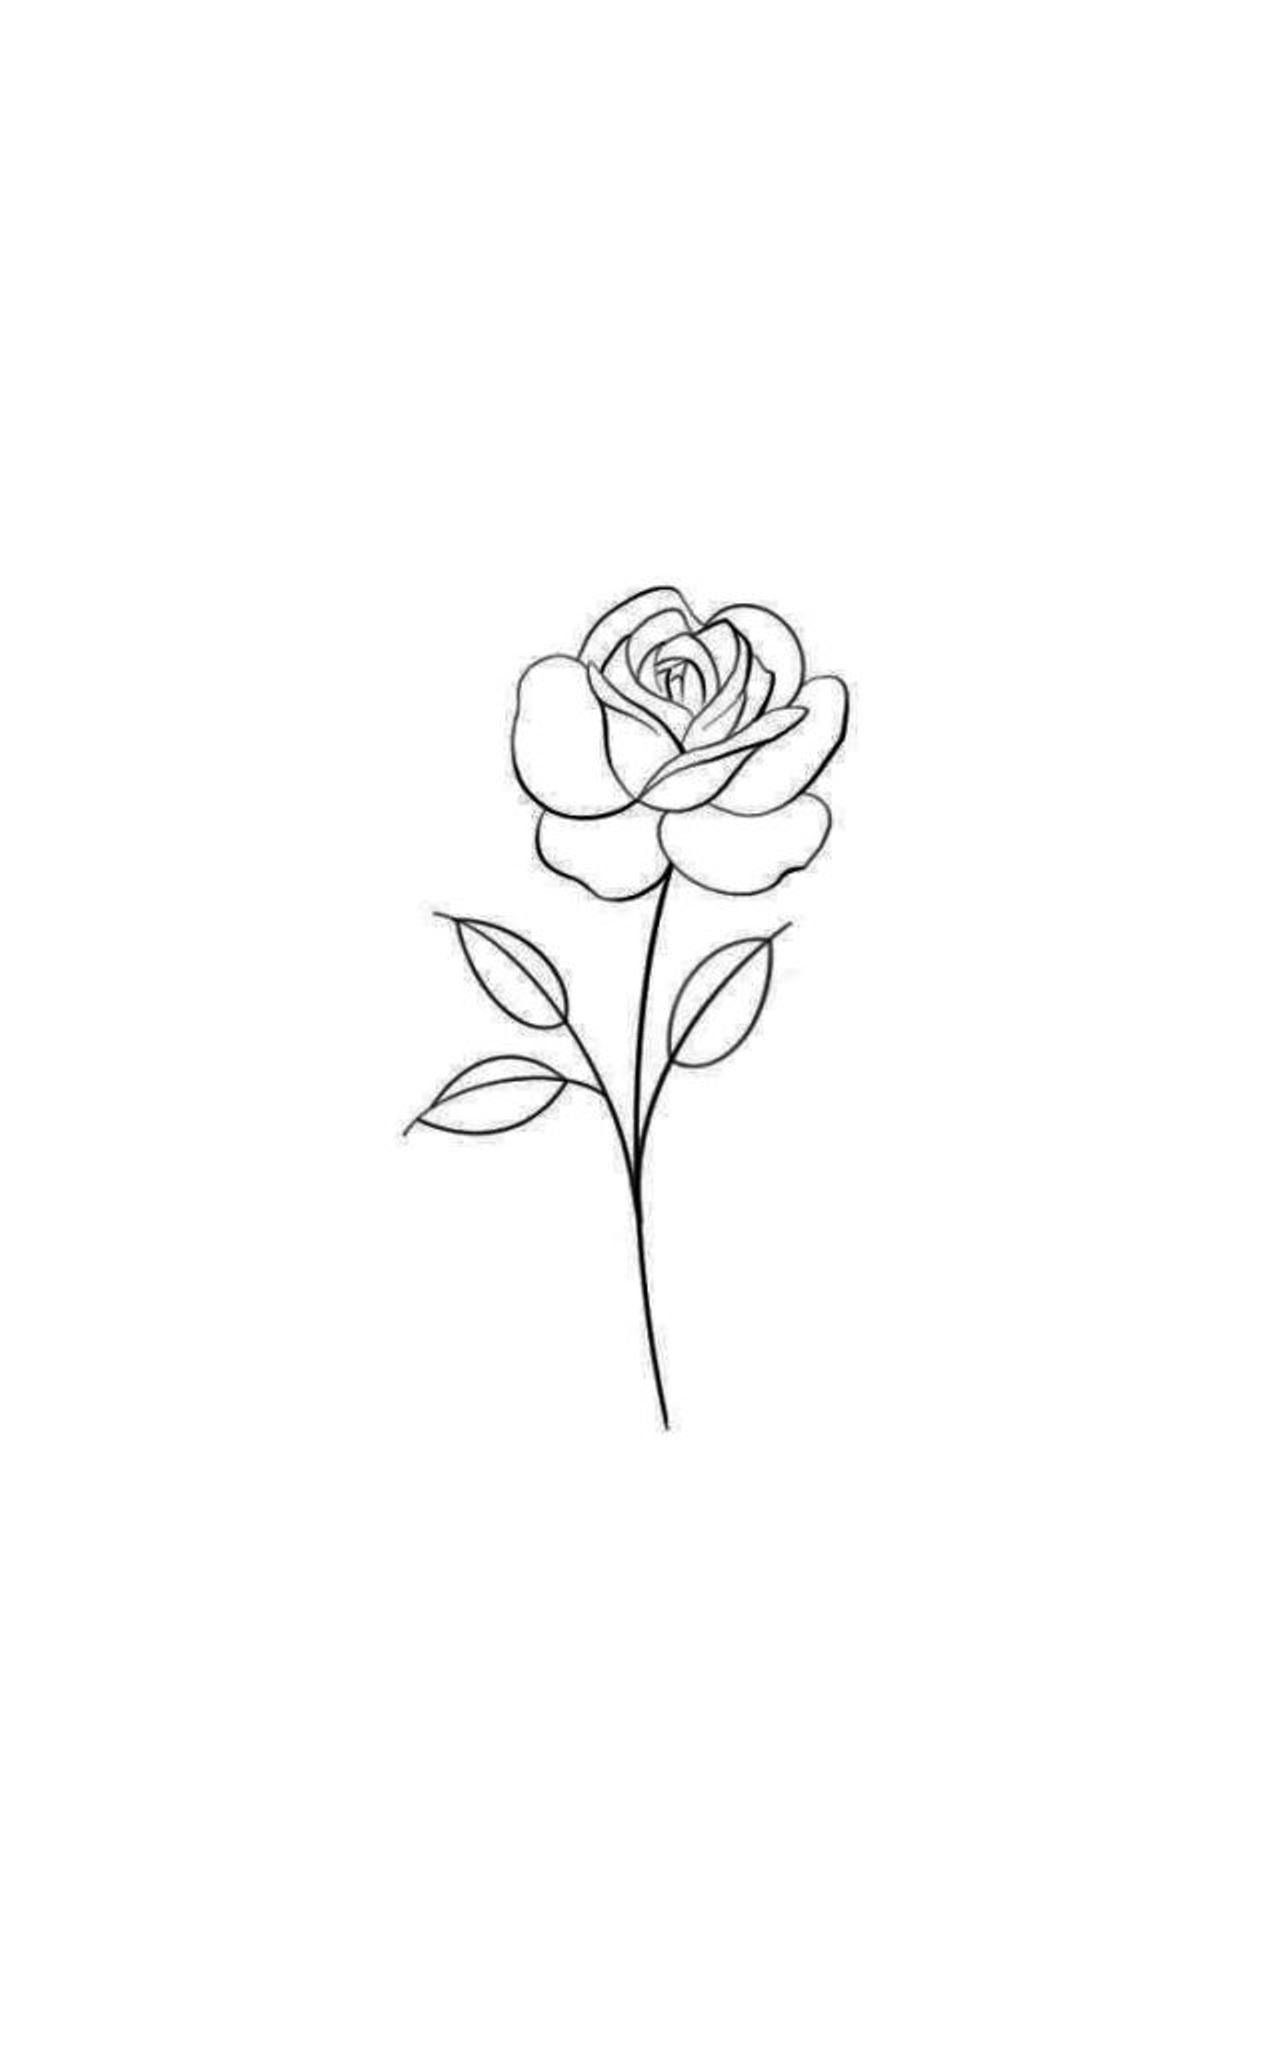 Small Rose Outline Tattoo: 15 Stunning Designs That Will Steal Your ...